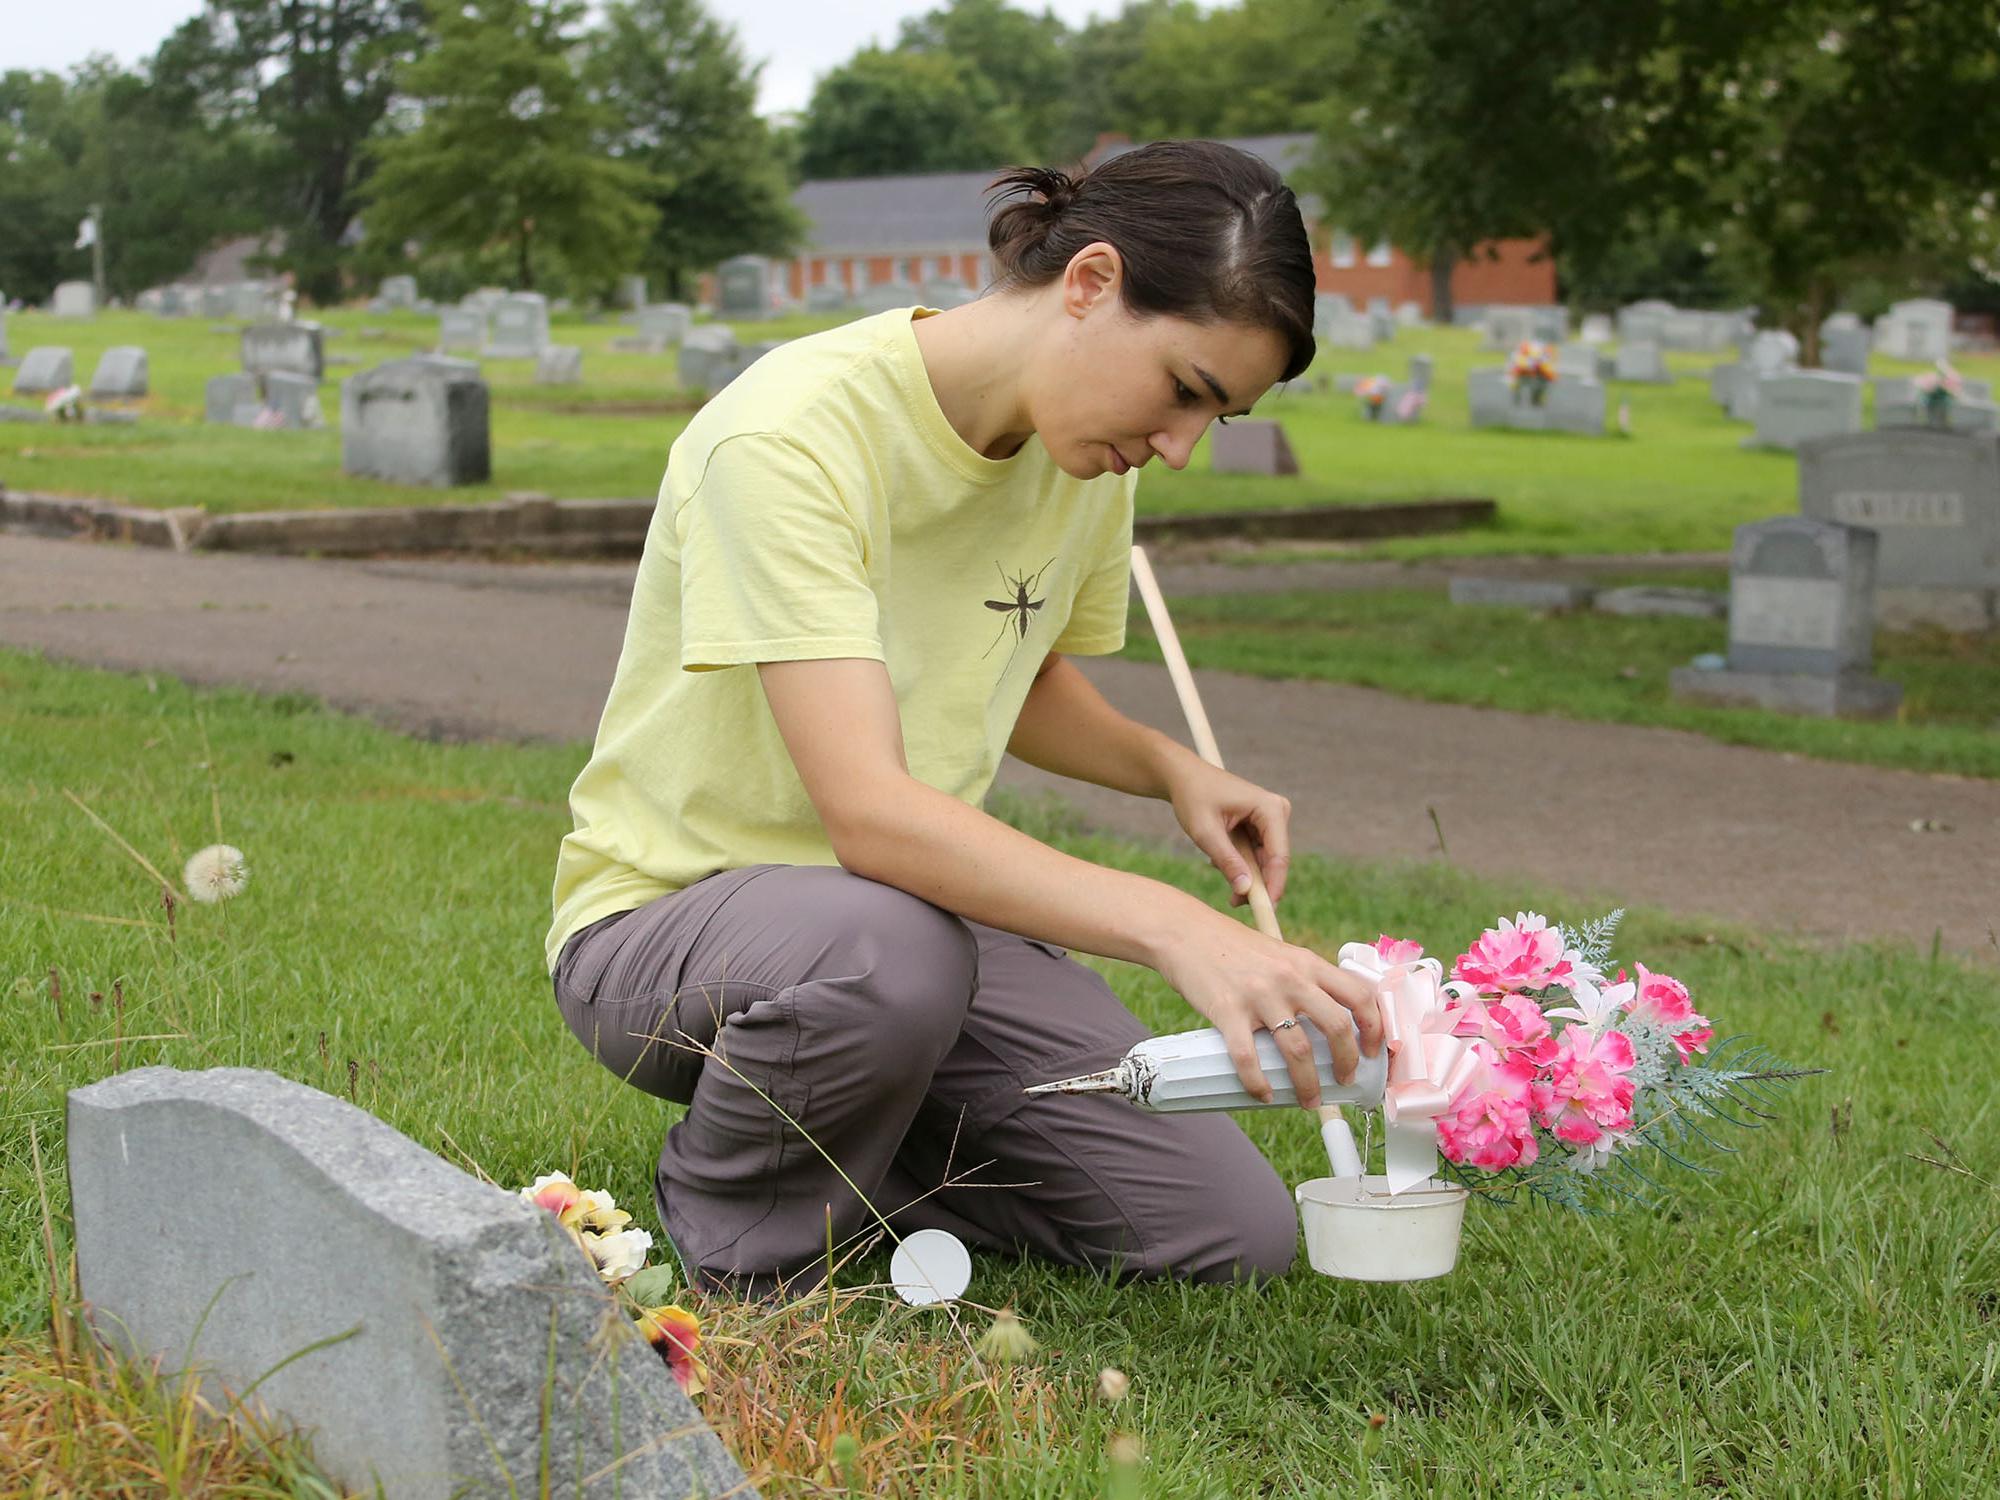 Gail Moraru, a research associate with the Mississippi State University Extension Service, collects mosquito larvae in water from a vase in Odd Fellows Cemetery in Starkville, Mississippi, on Aug. 10, 2016. Moraru and others workers with MSU Extension are collecting samples in 41 north Mississippi counties in an effort to pinpoint potential Zika-affected areas. (Photo by MSU Extension Service/Kat Lawrence)